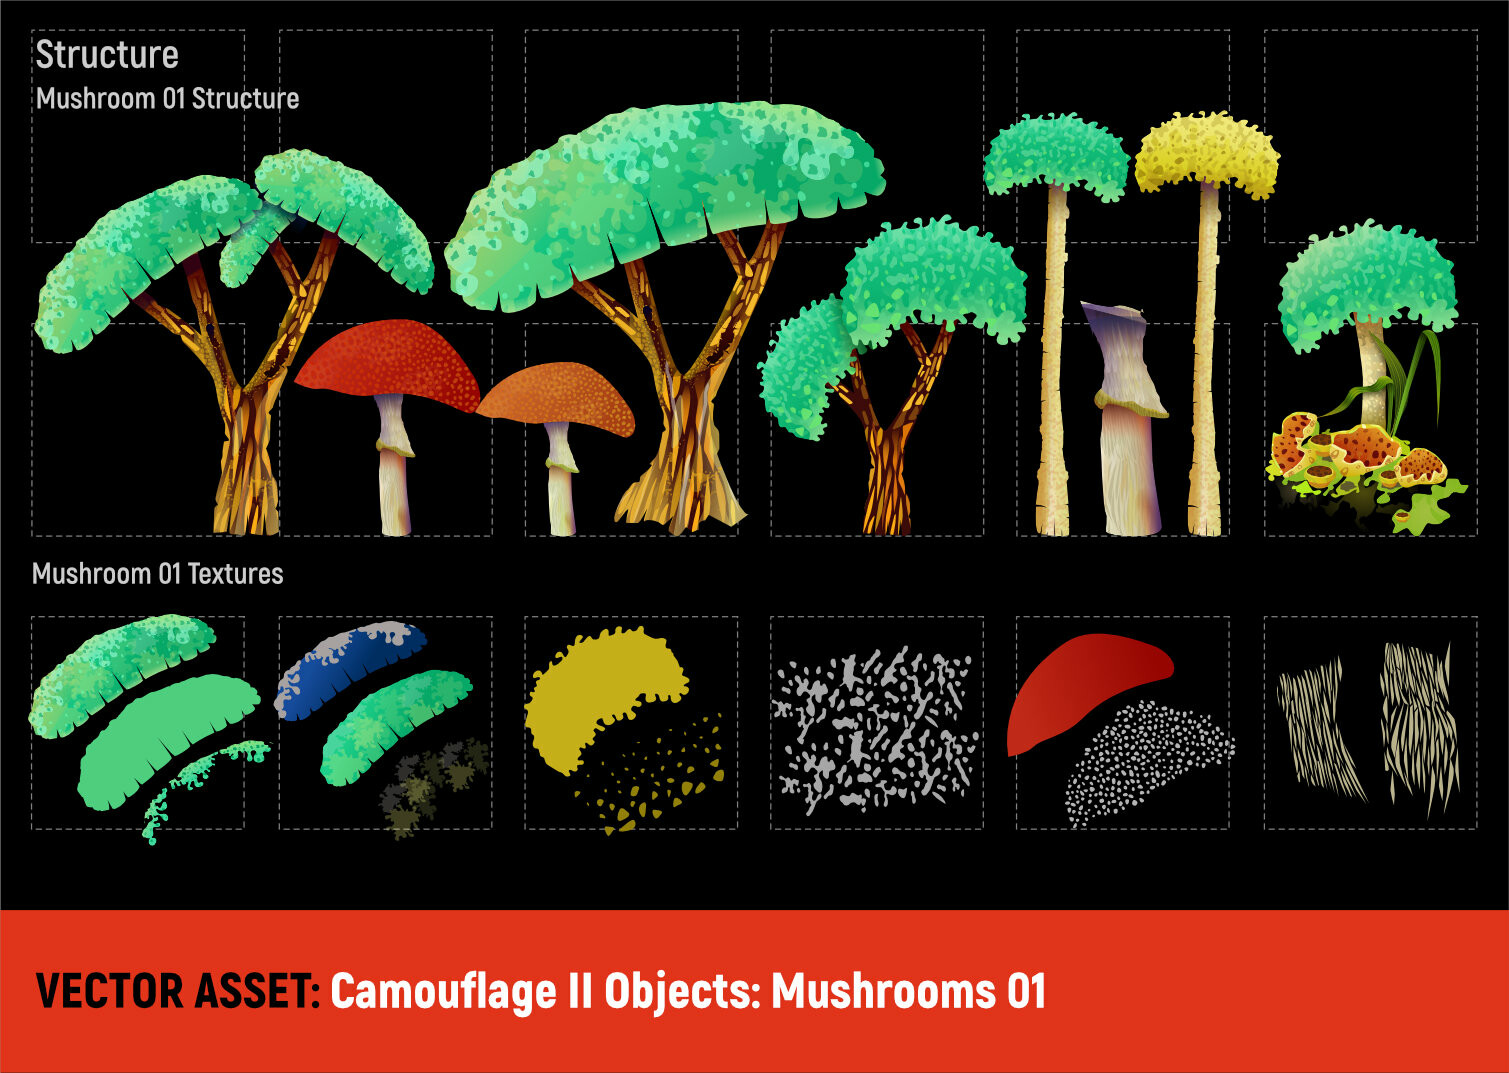 Vector Assets: Camouflage 2
Mushrooms 01